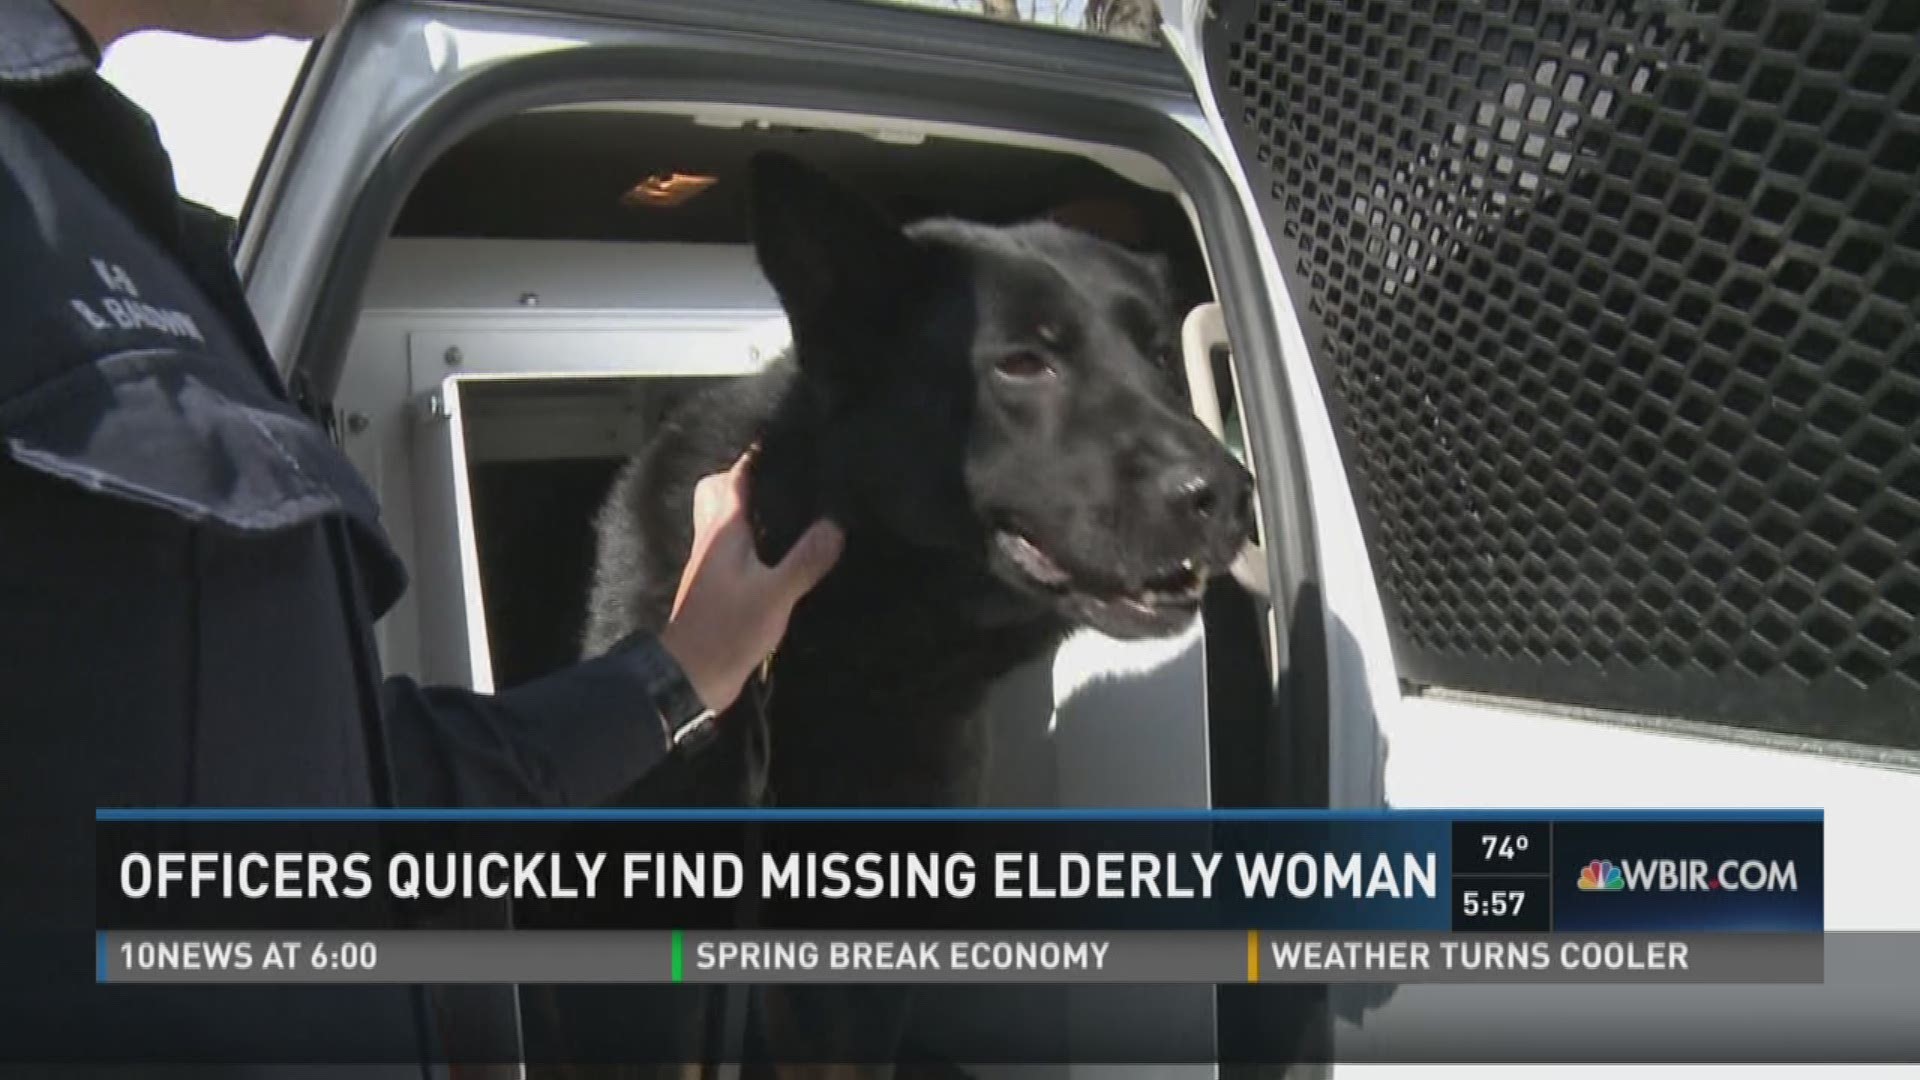 The 82-year-old woman walked away from her home into a wooded area. A Knoxville Police Dept. K9 team was able to track her down pretty quickly.